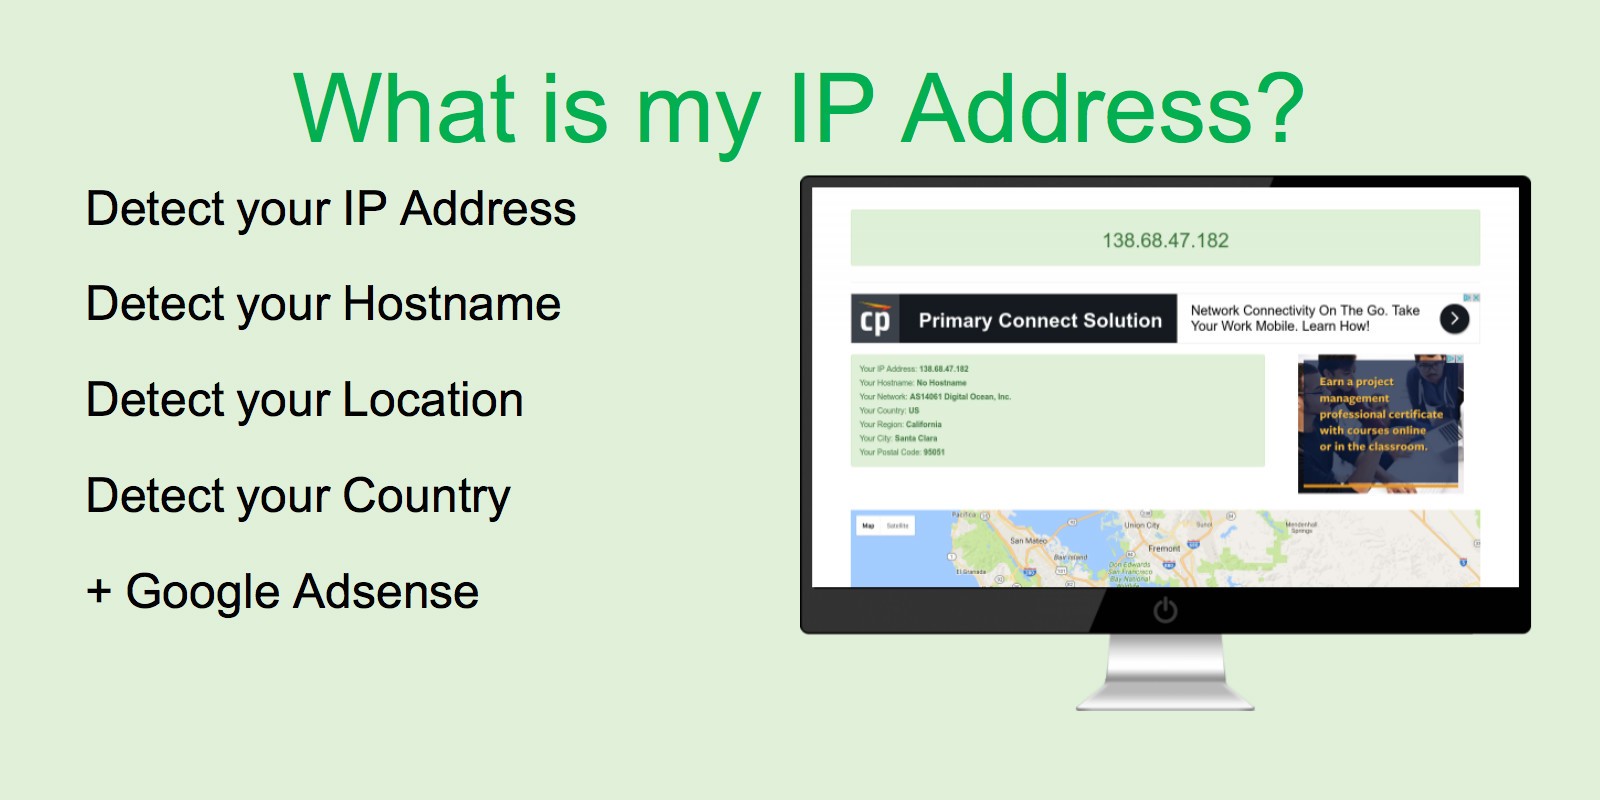 What Is My IP Address Script by Theveloper | Codester